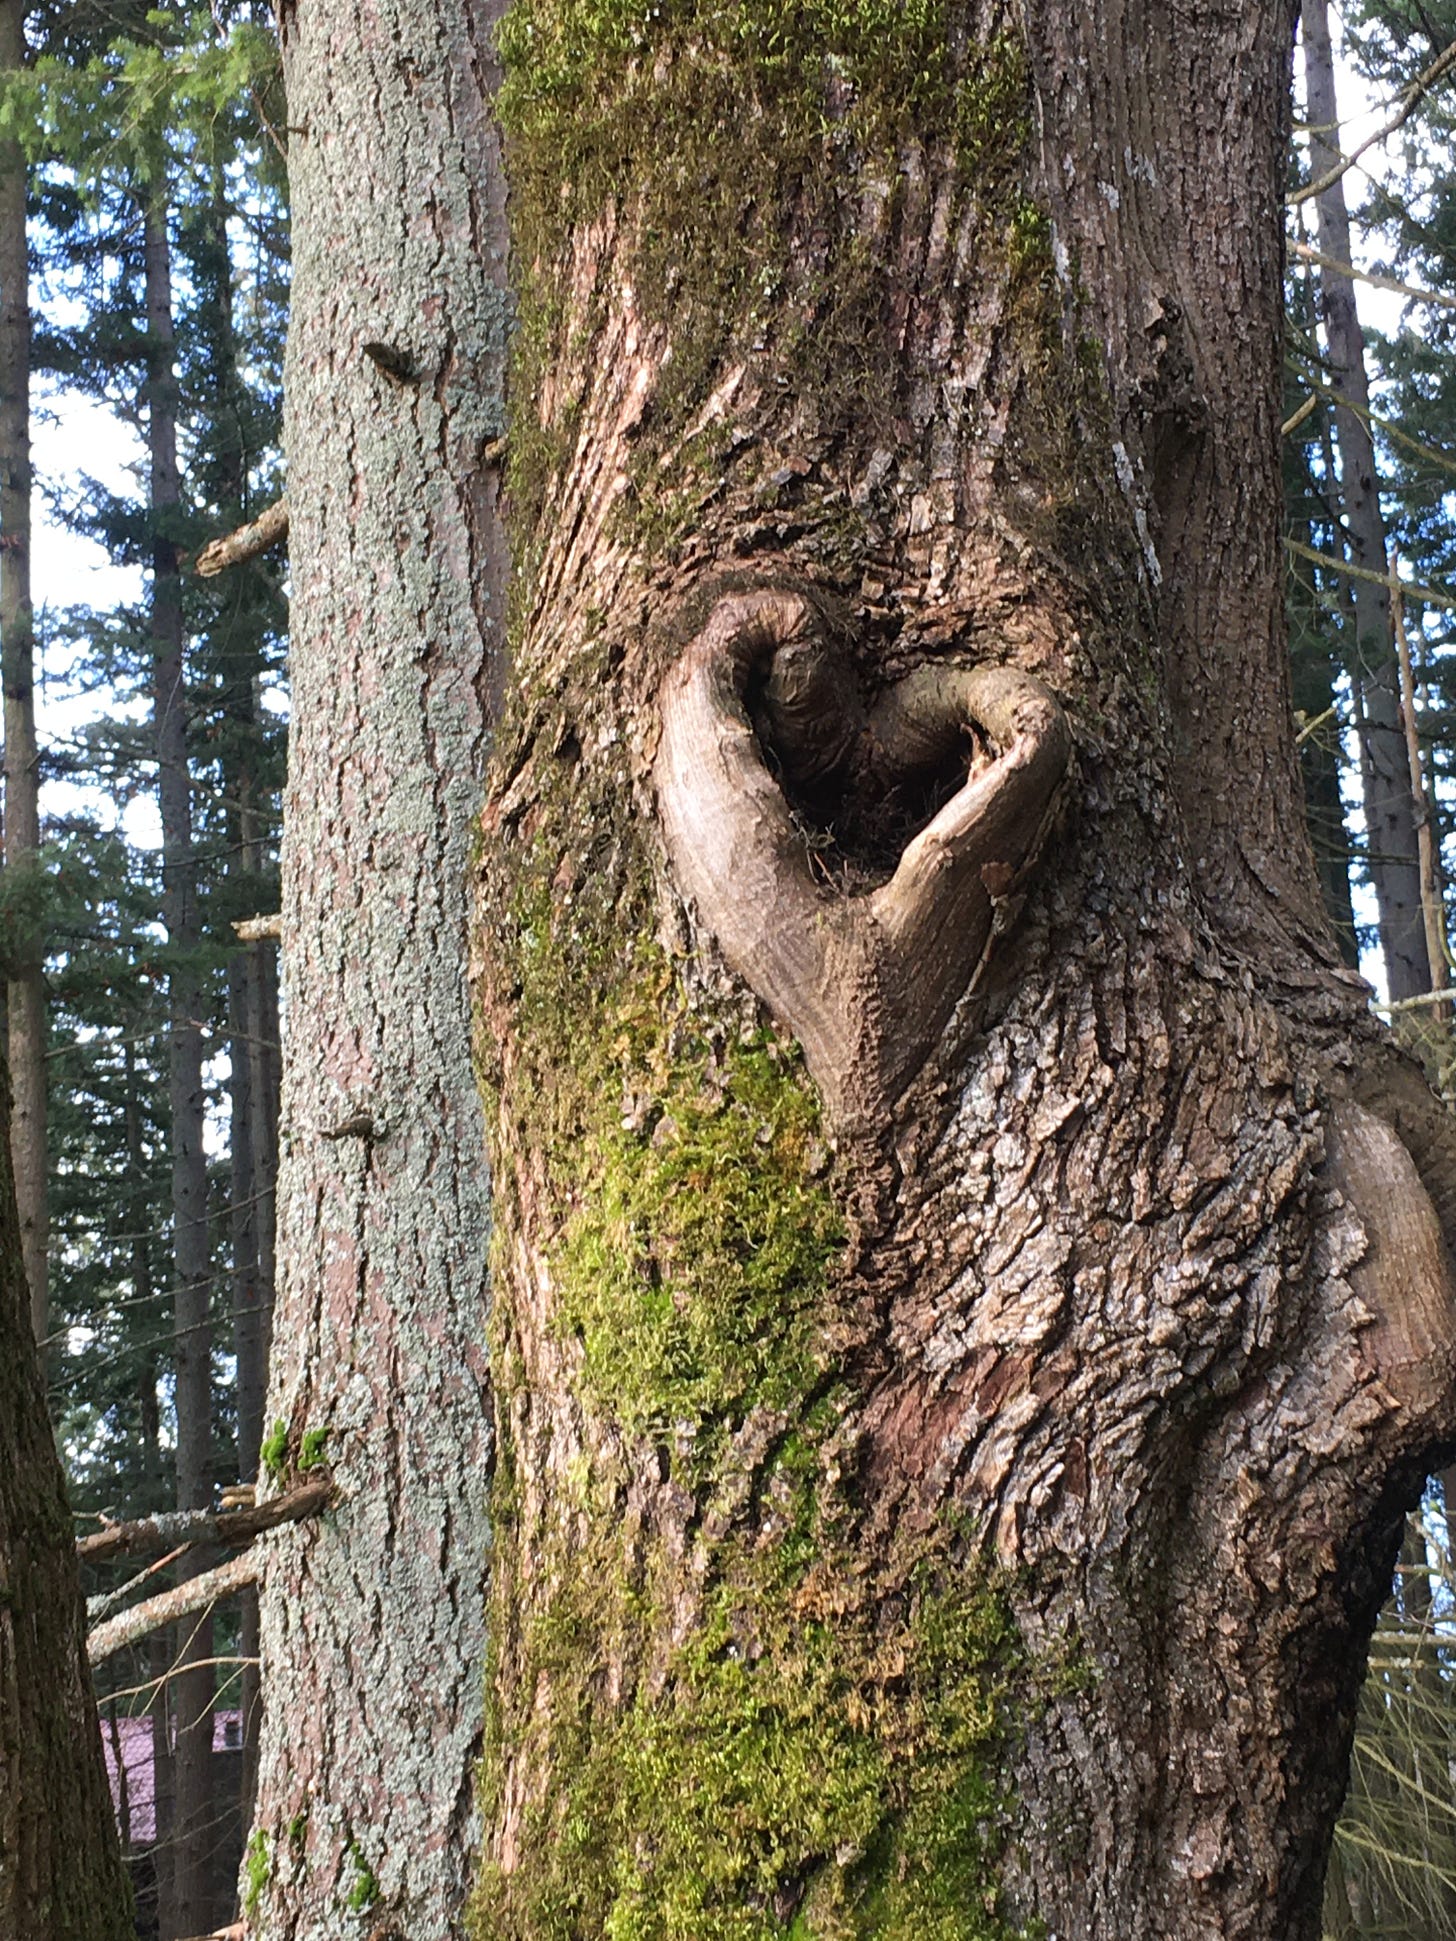 somewhat moss covered tree, with others in the background. Tree in foreground has heart-shaped bark with an opening in the middle of the heart.